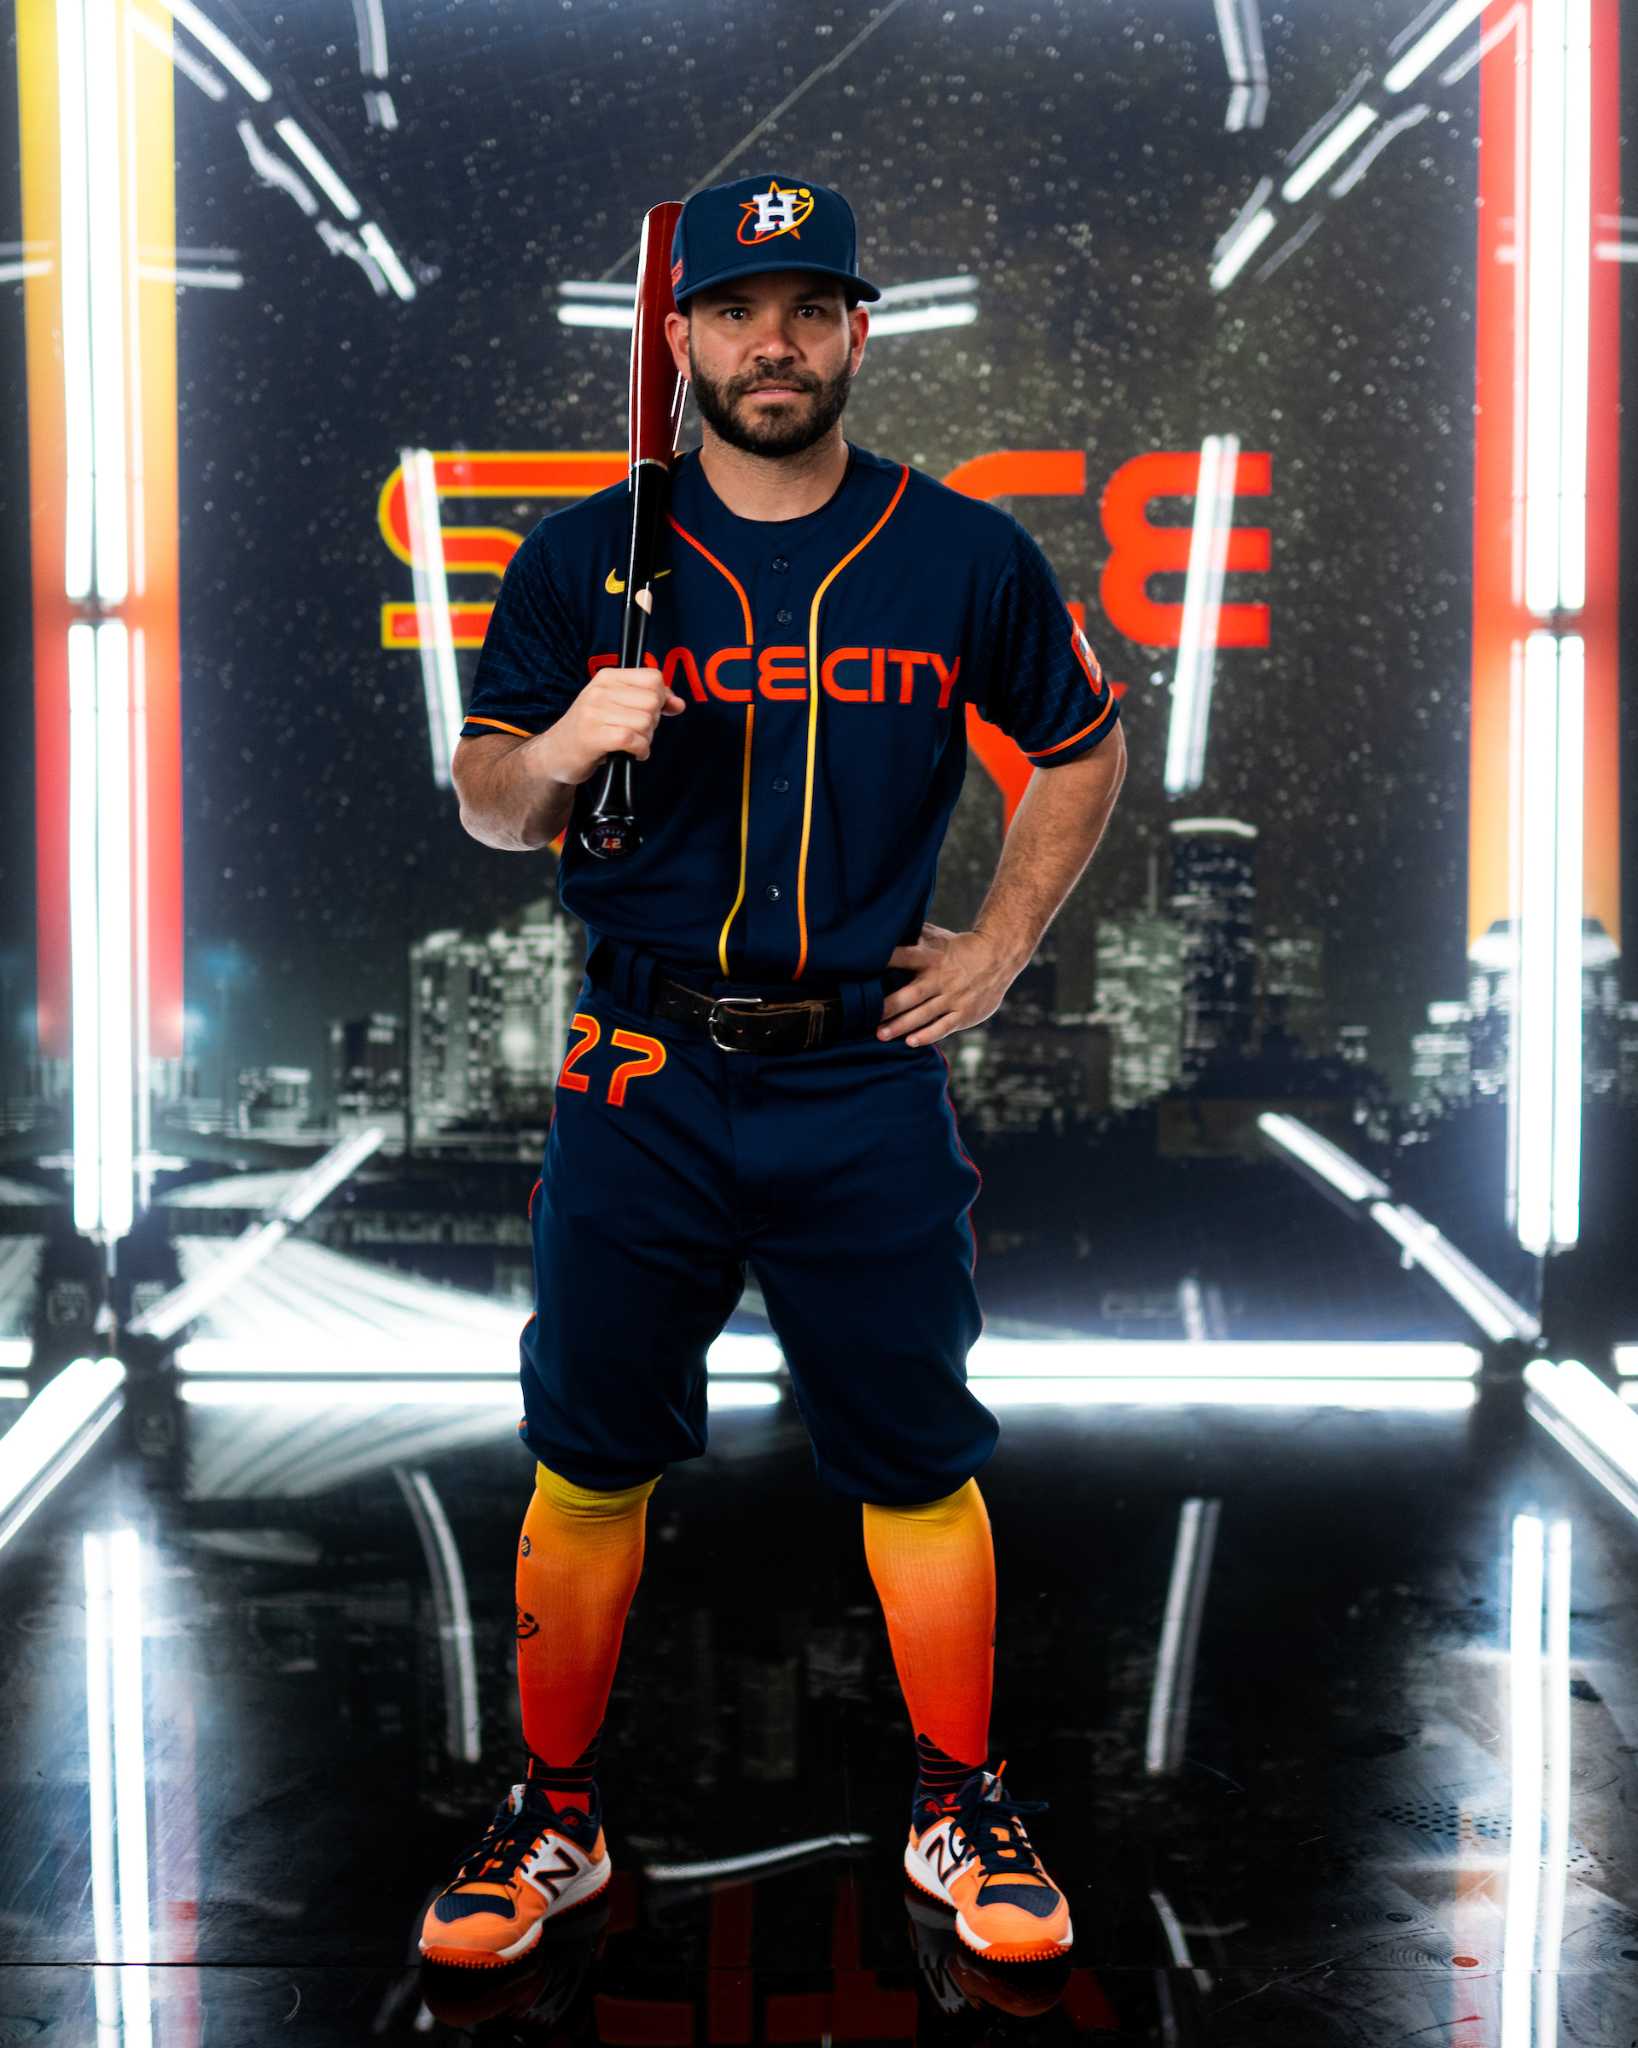 Houston Astros - Still need your #SpaceCity merch? We got you. We